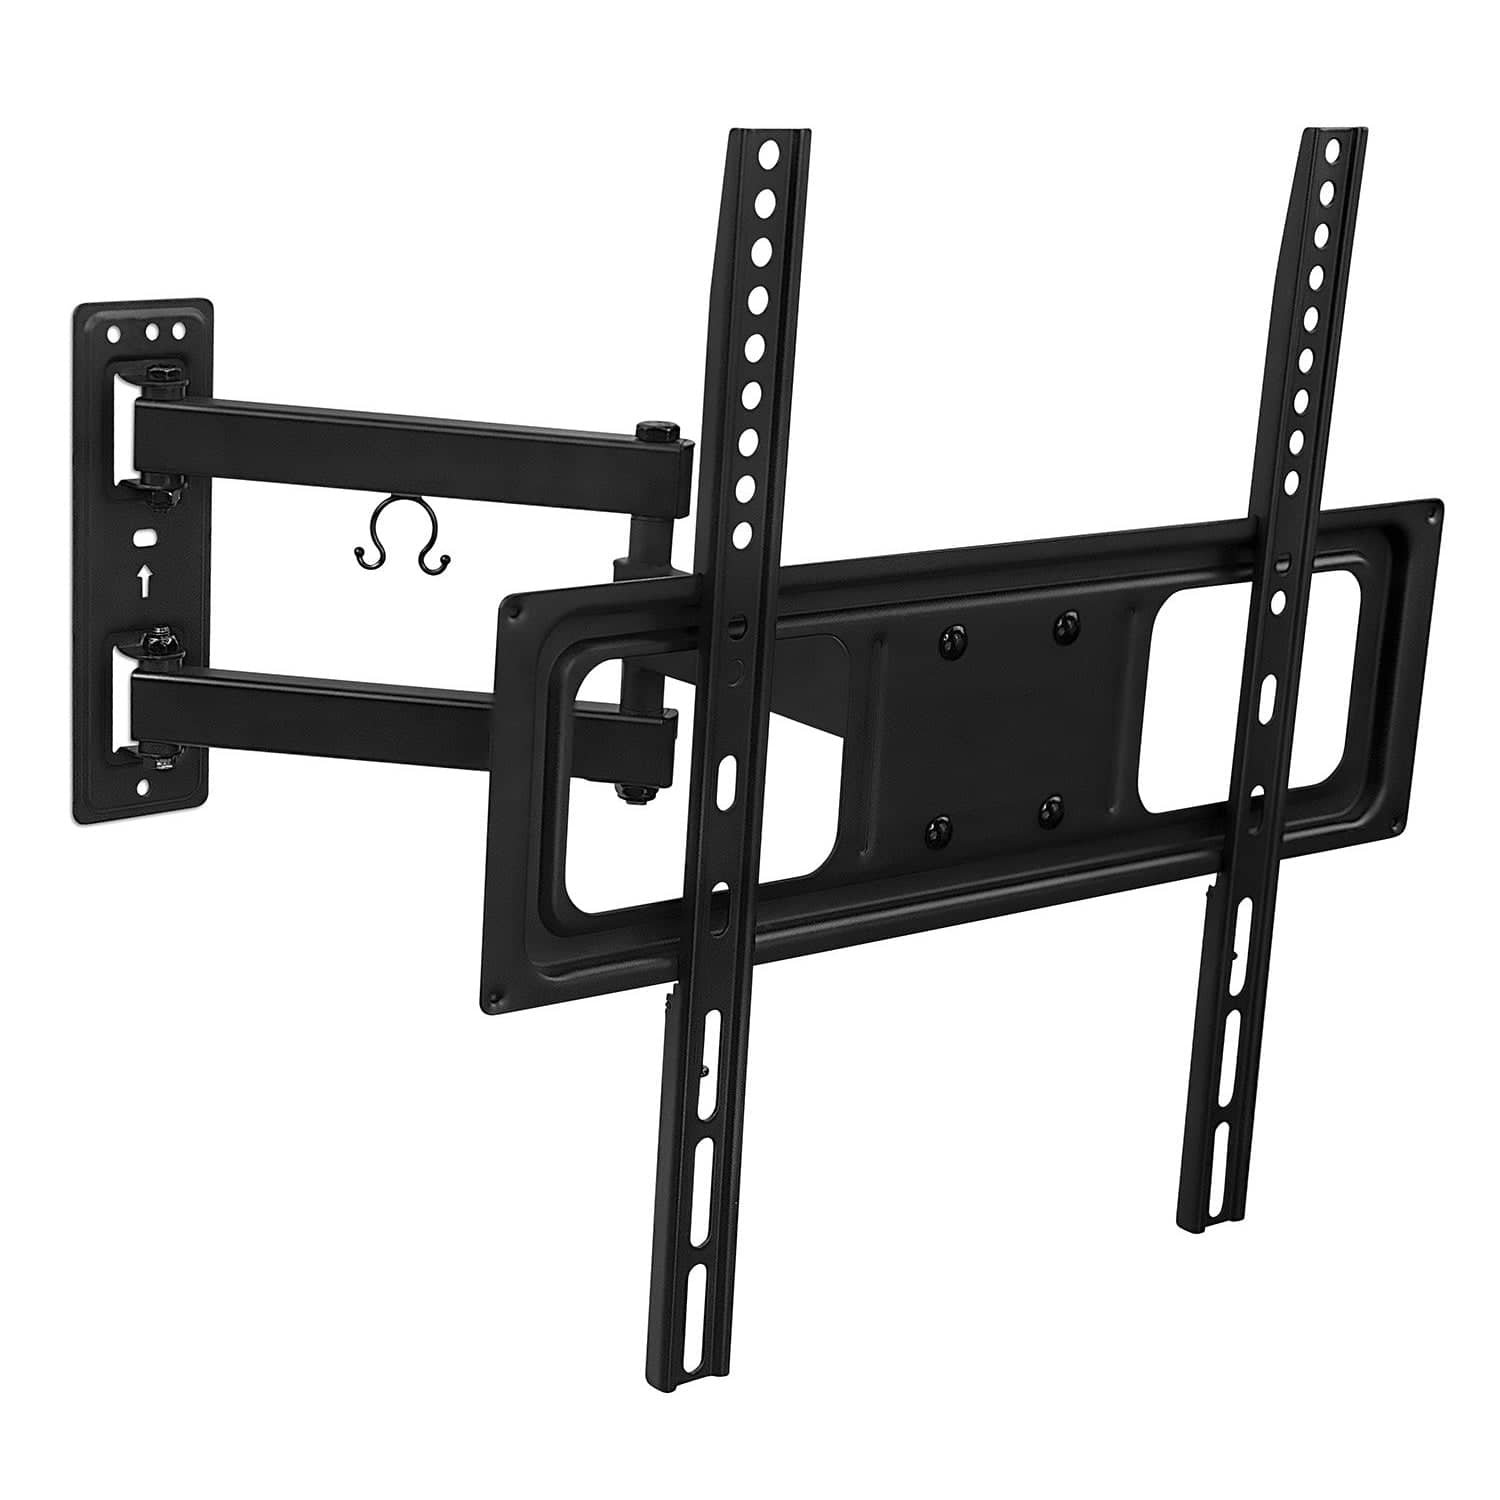 Mount-it! TV Wall Mount w/ Full Motion Articulating Arm (MI-3991B), Long Arm Extends Up to 17", Fits 26" to 55" TVs